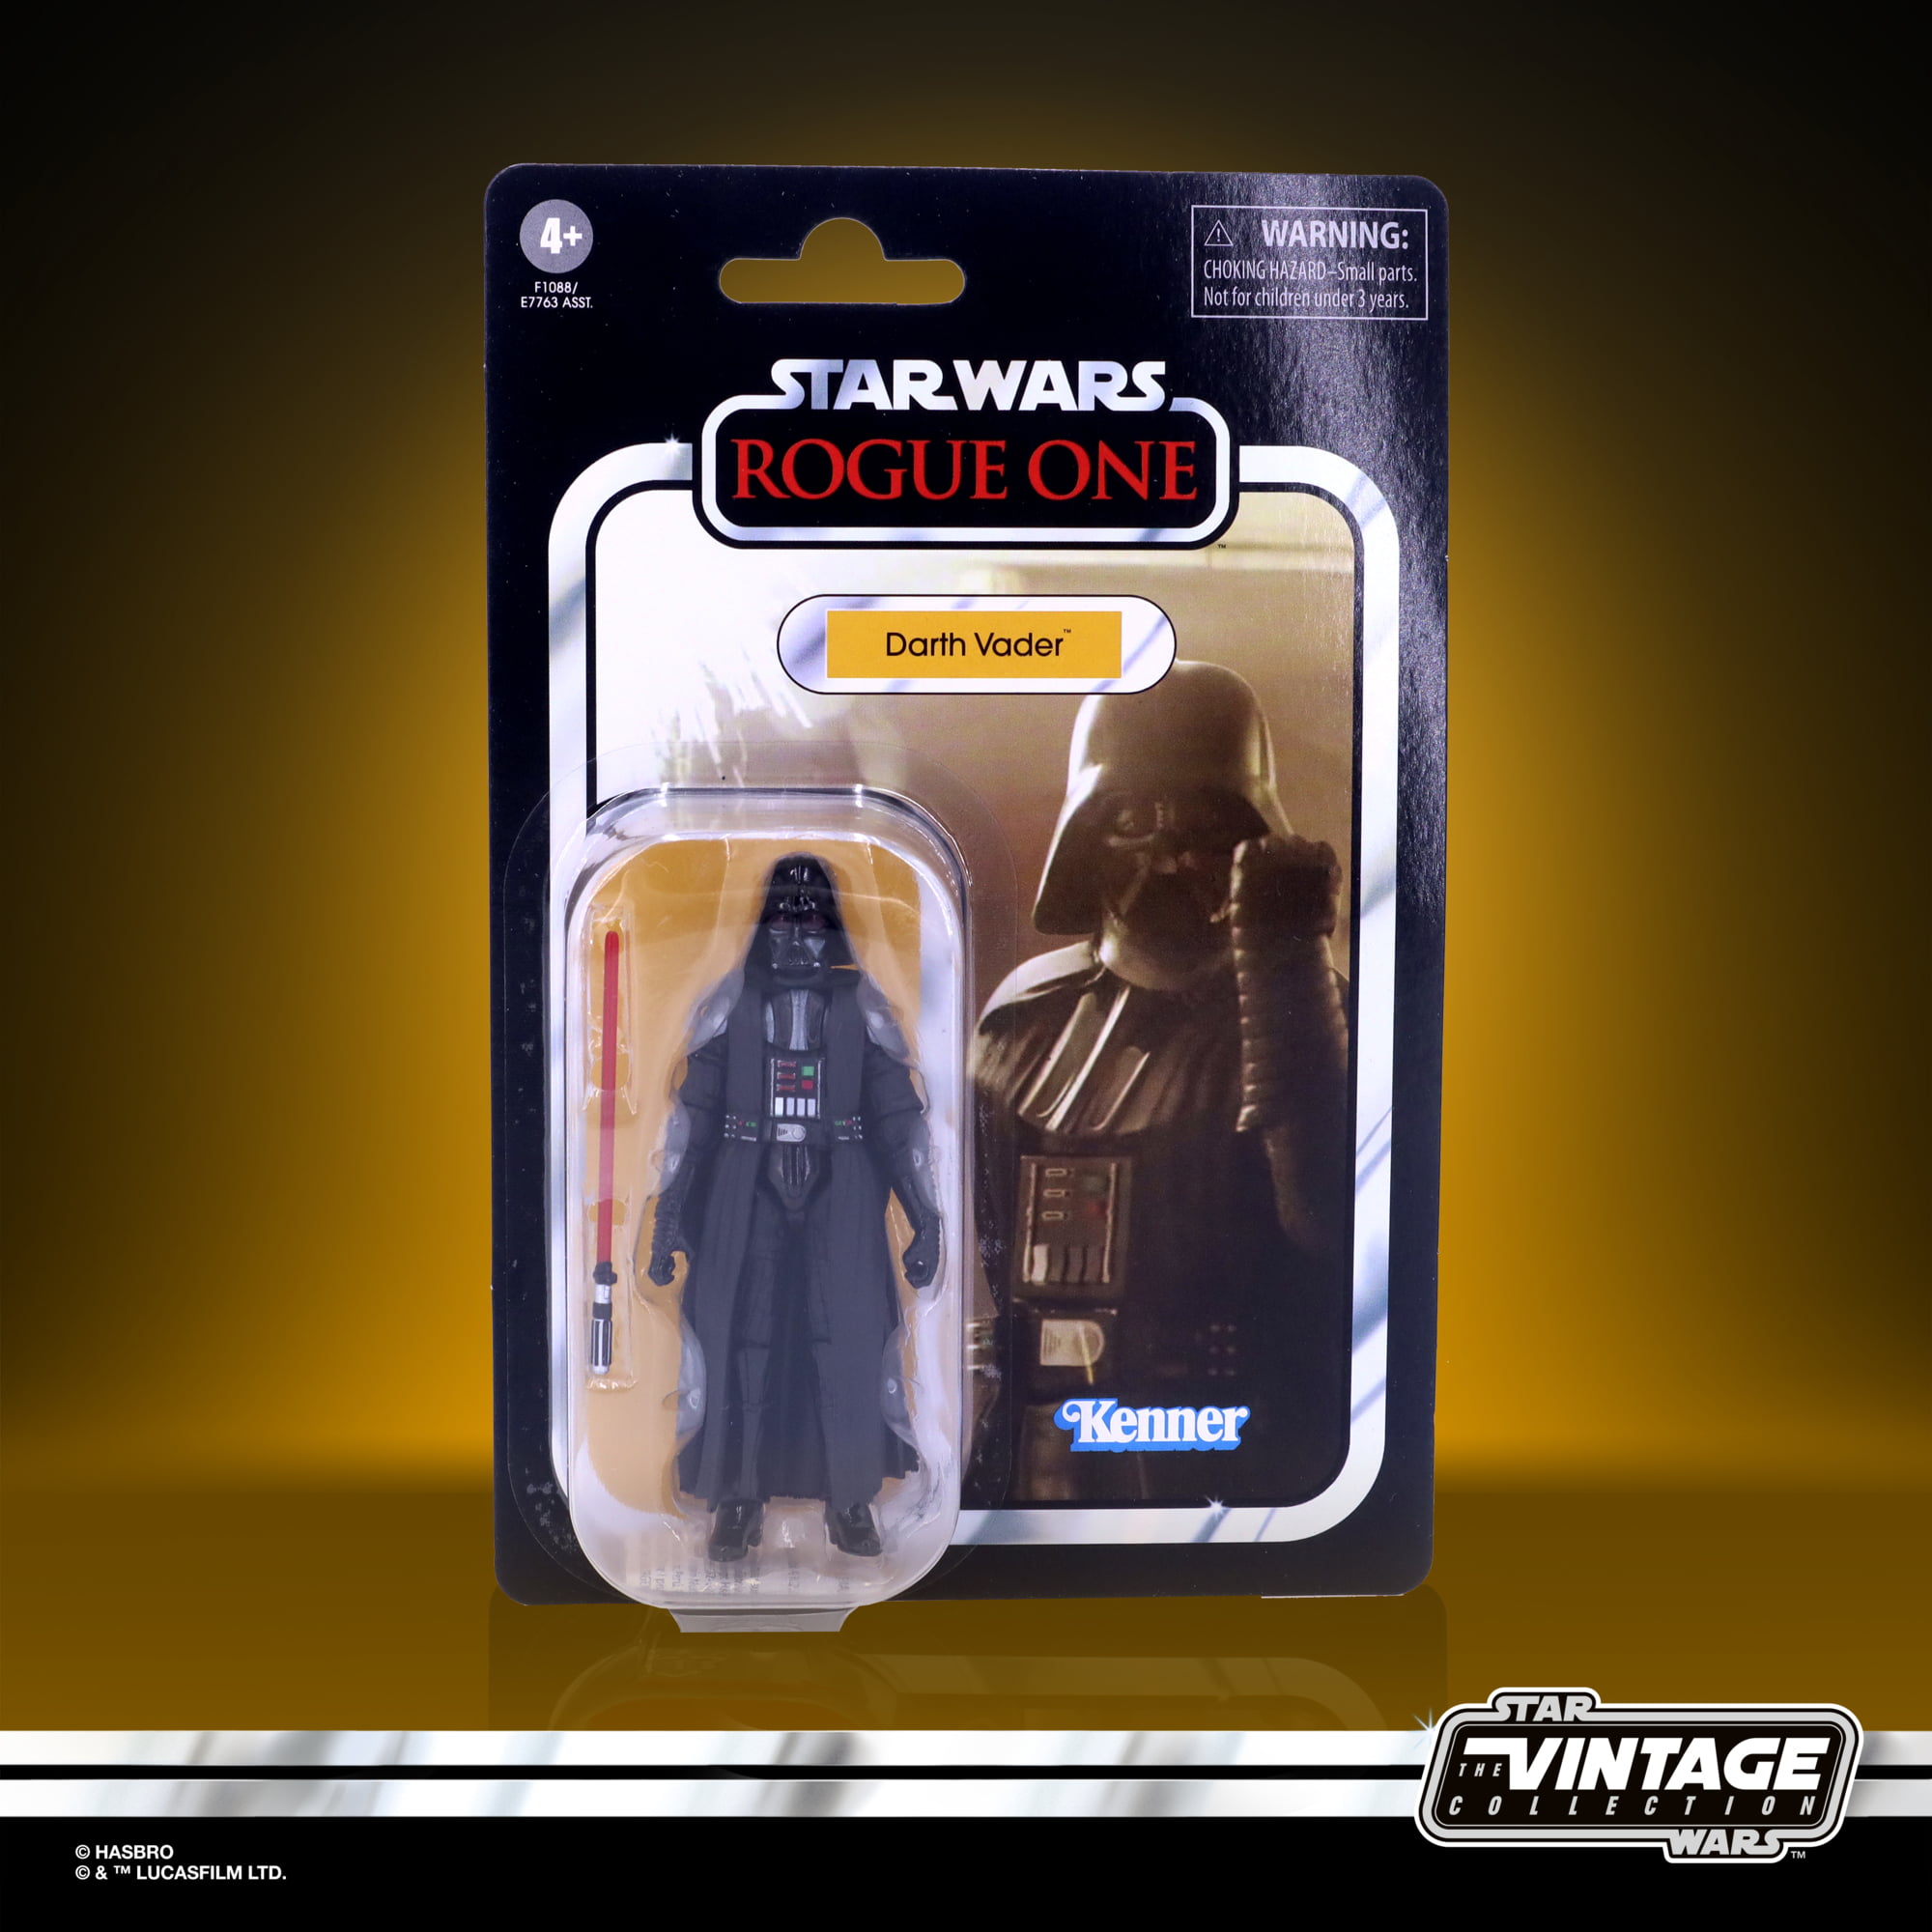 BRAND NEW!!! Star Wars DARTH VADER Rogue One 3.75 Inches Wave 2 MINT!!! 